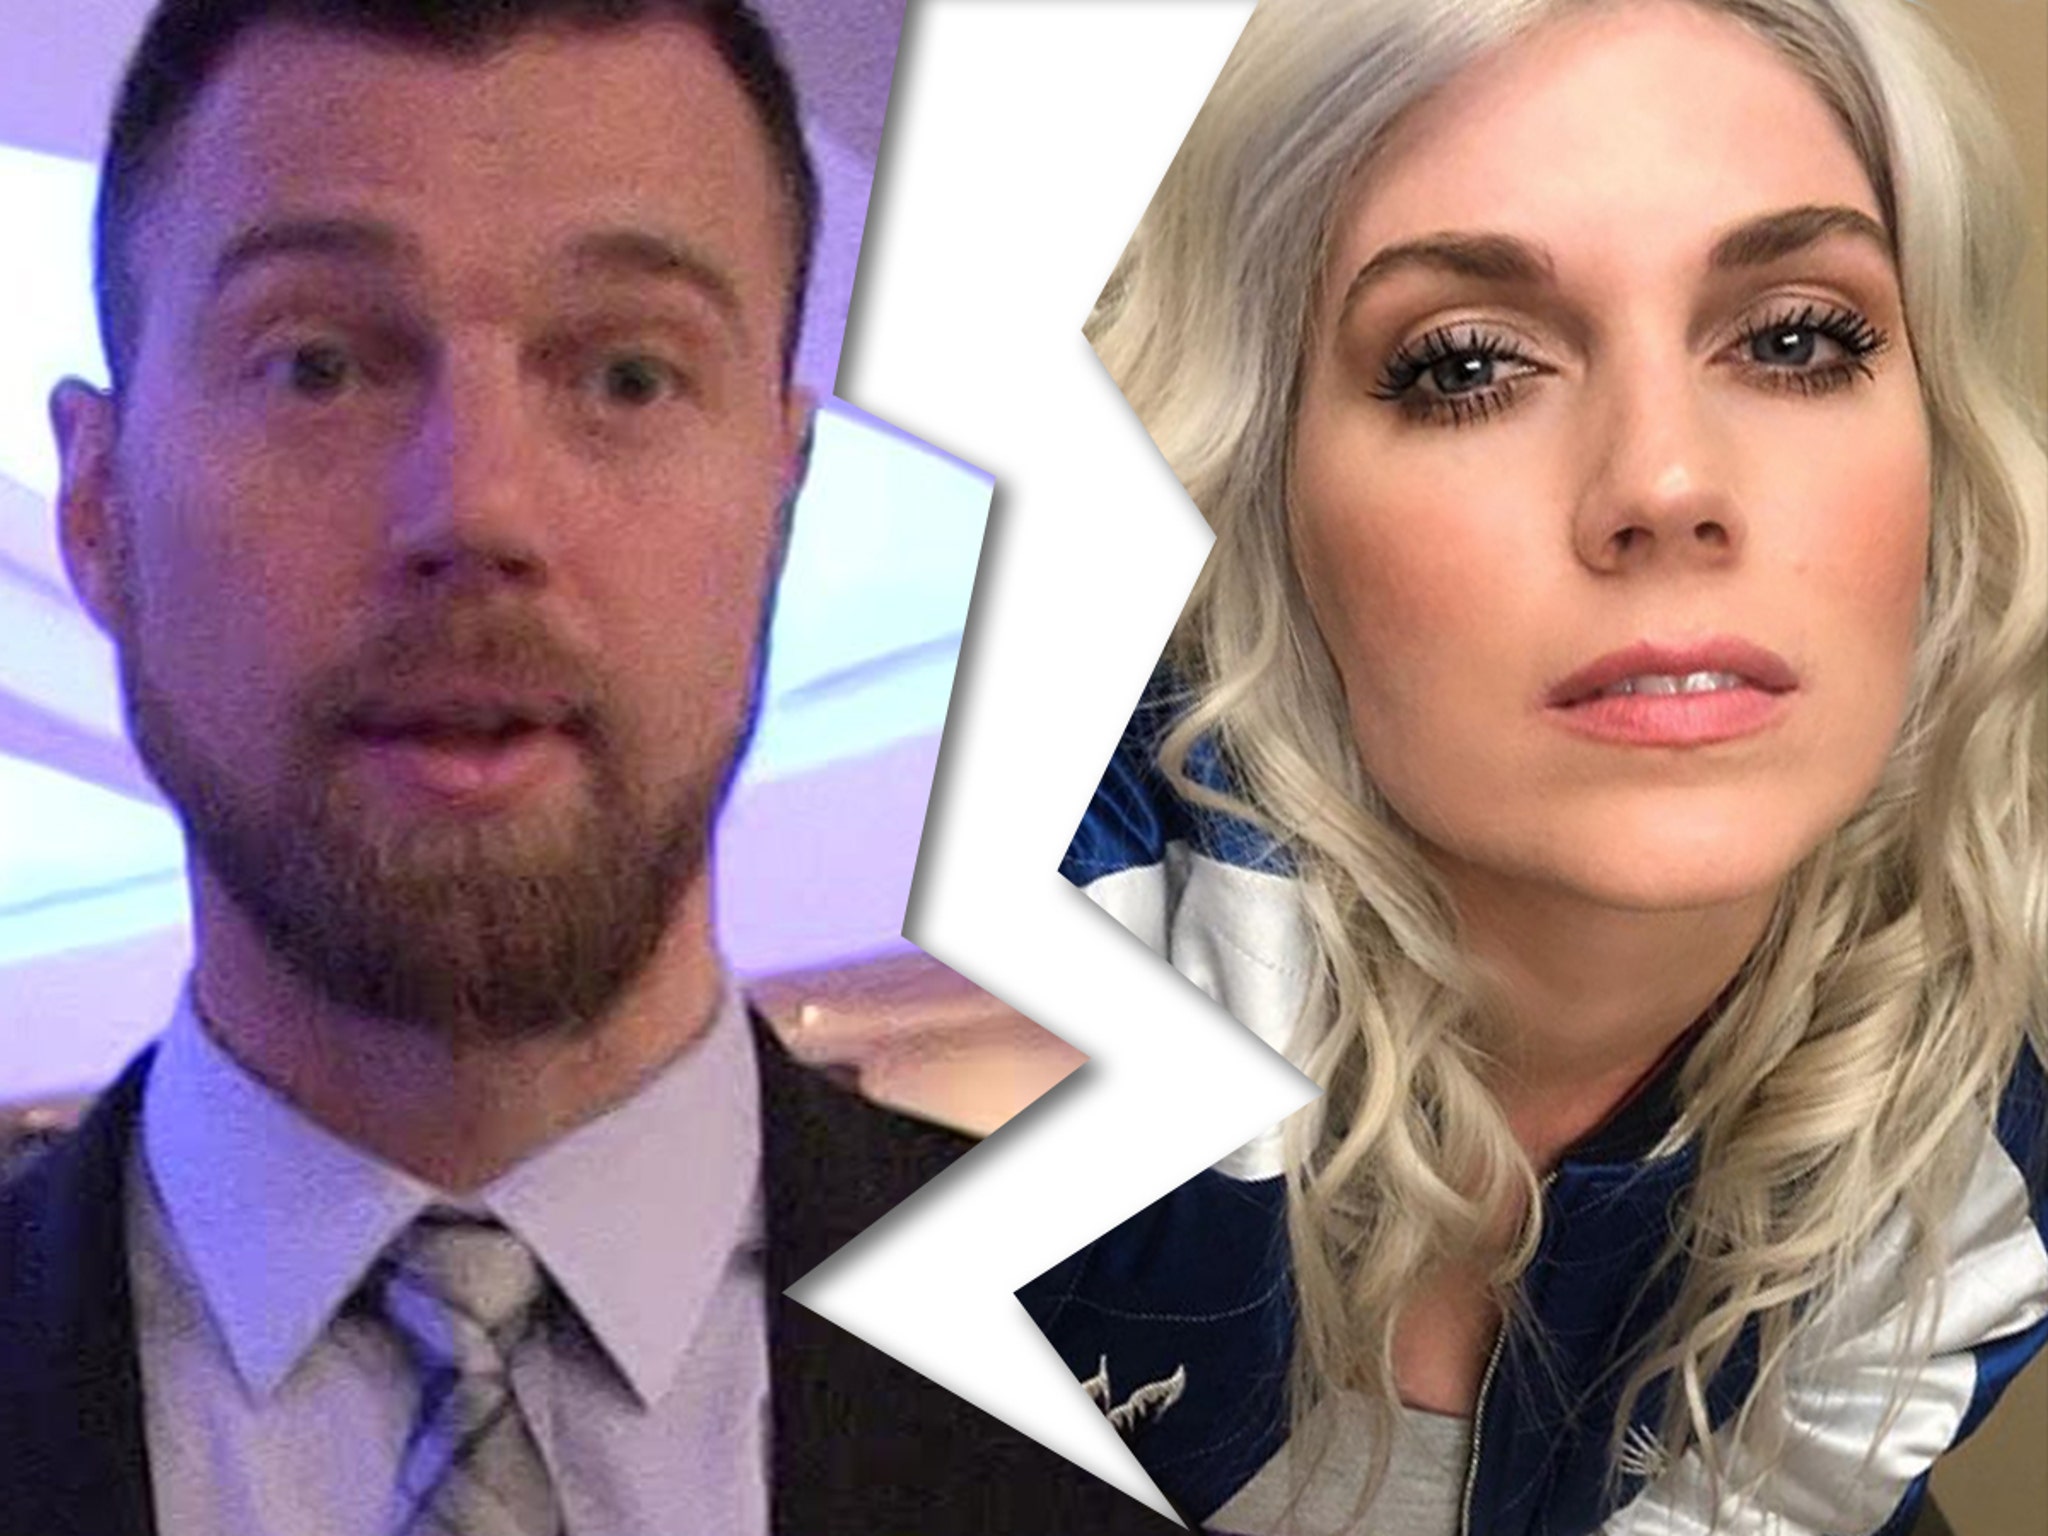 What did Ben Zobrist say about his wife Julianna?